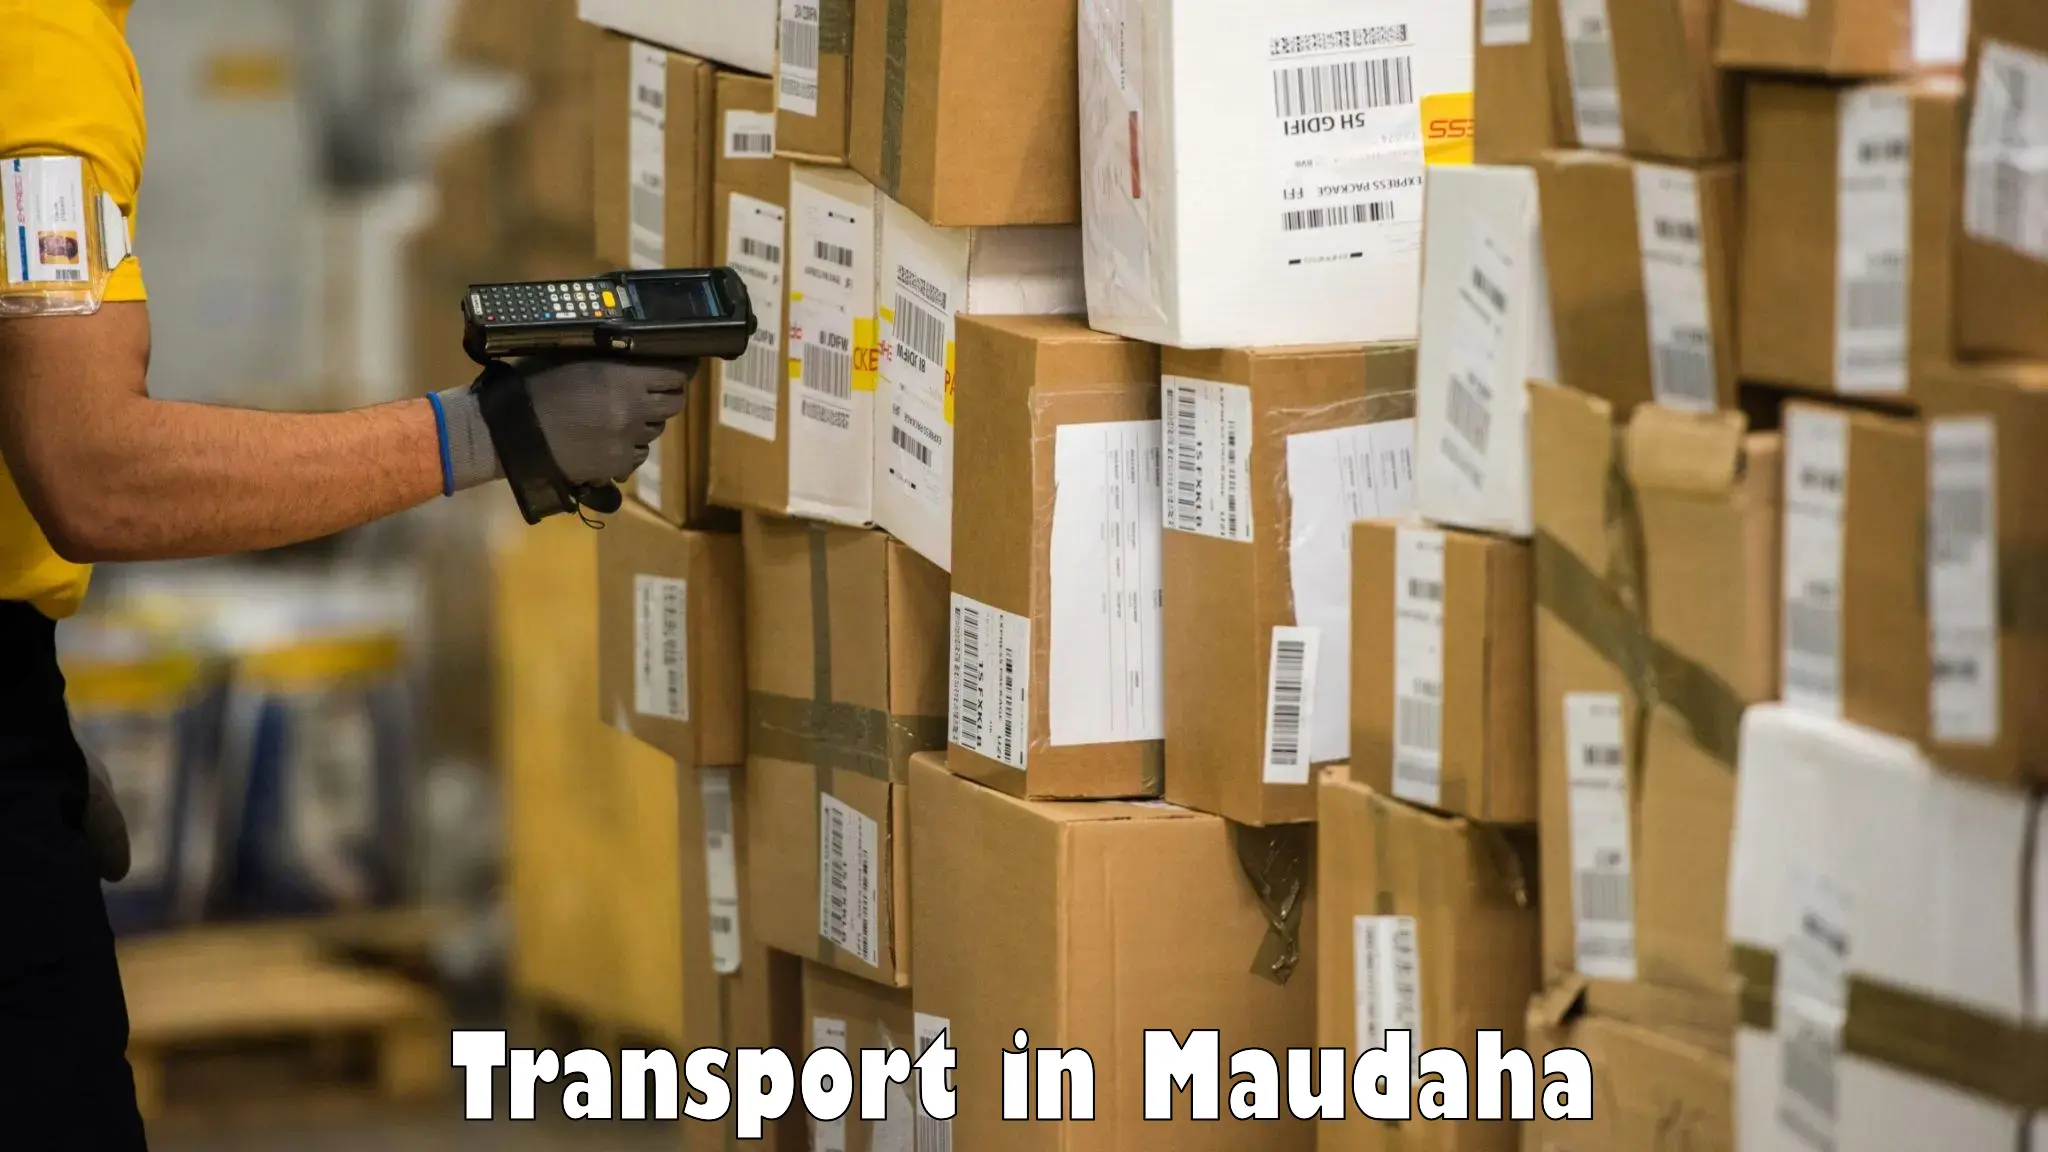 Air freight transport services in Maudaha